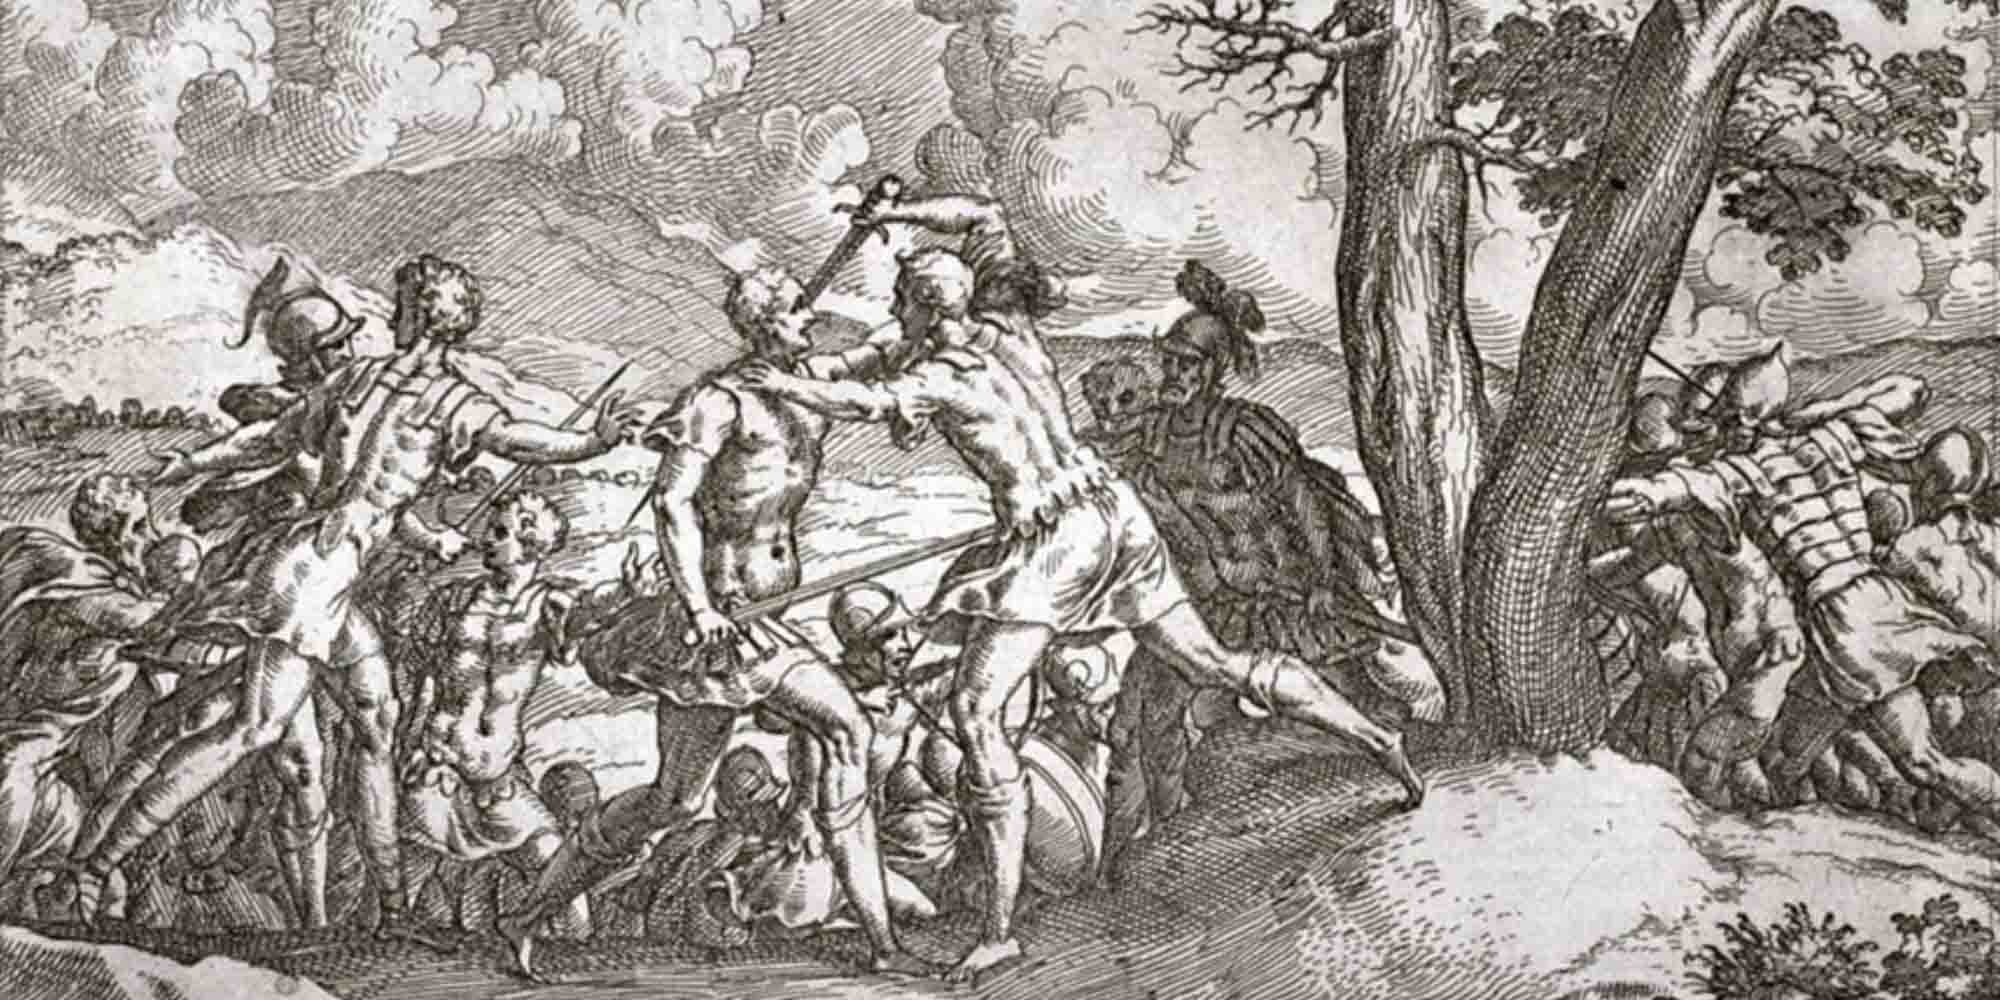 Etching depicting Romulus and Remus